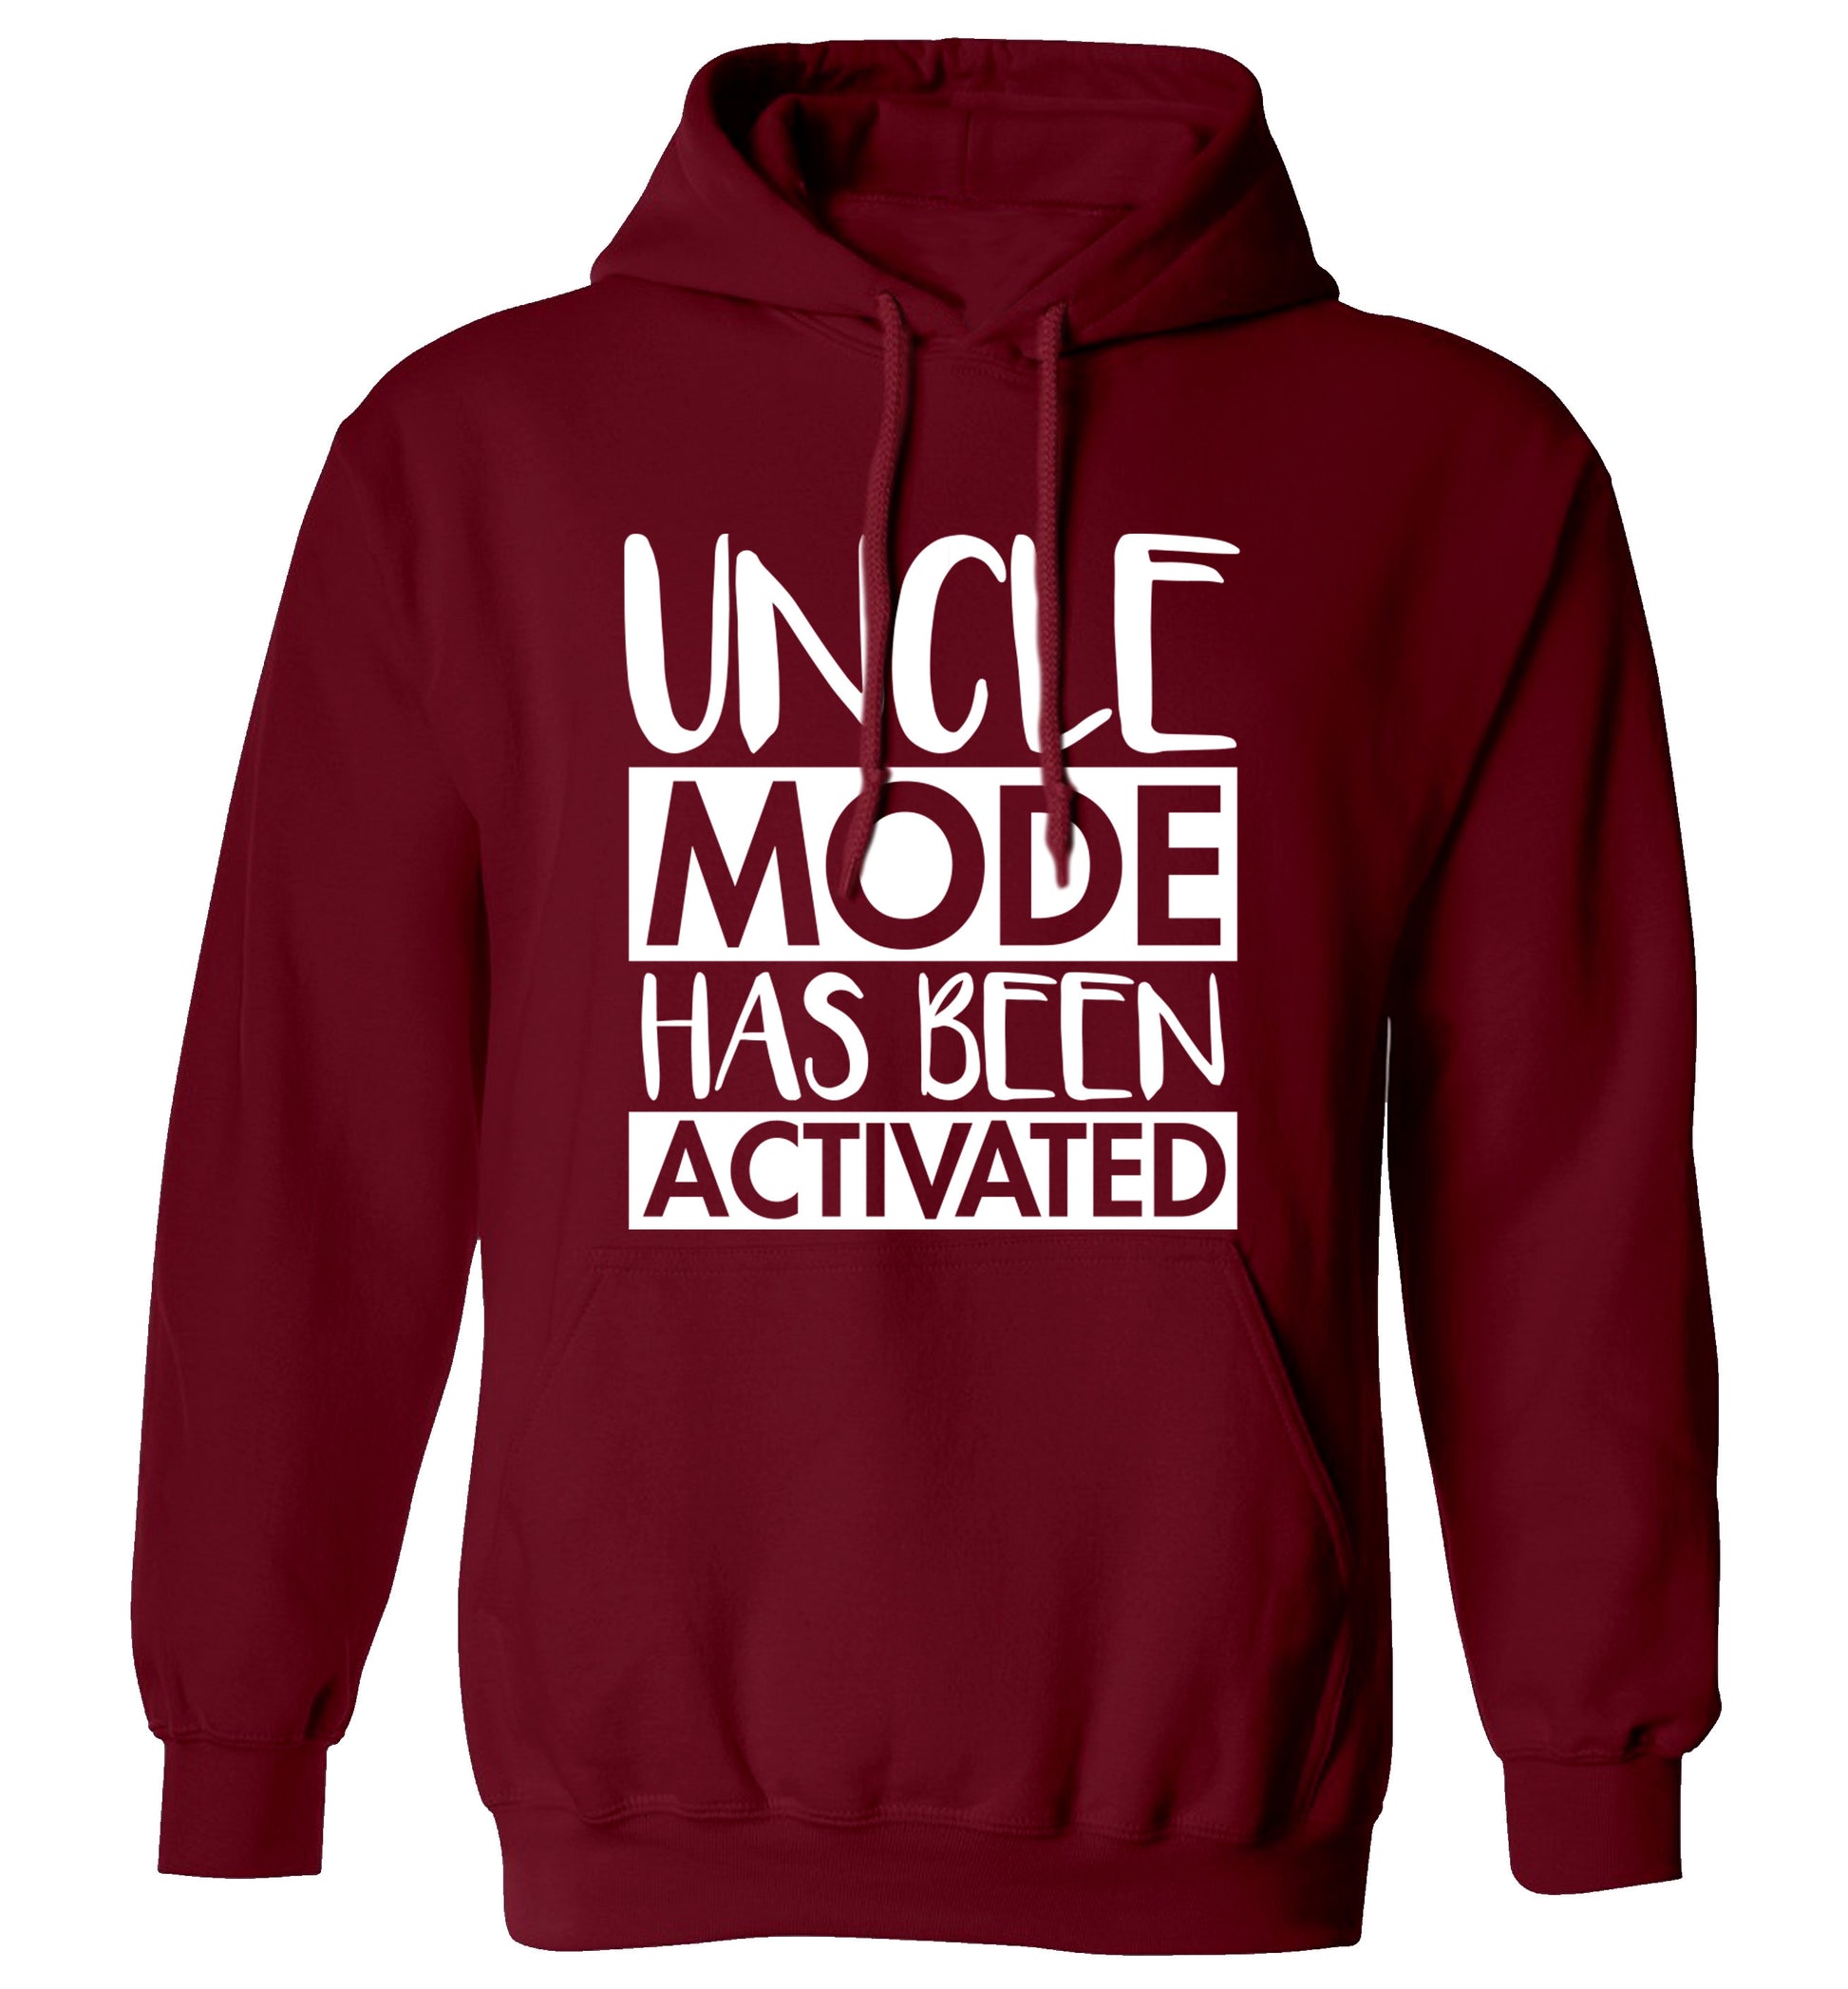 Uncle mode activated adults unisex maroon hoodie 2XL